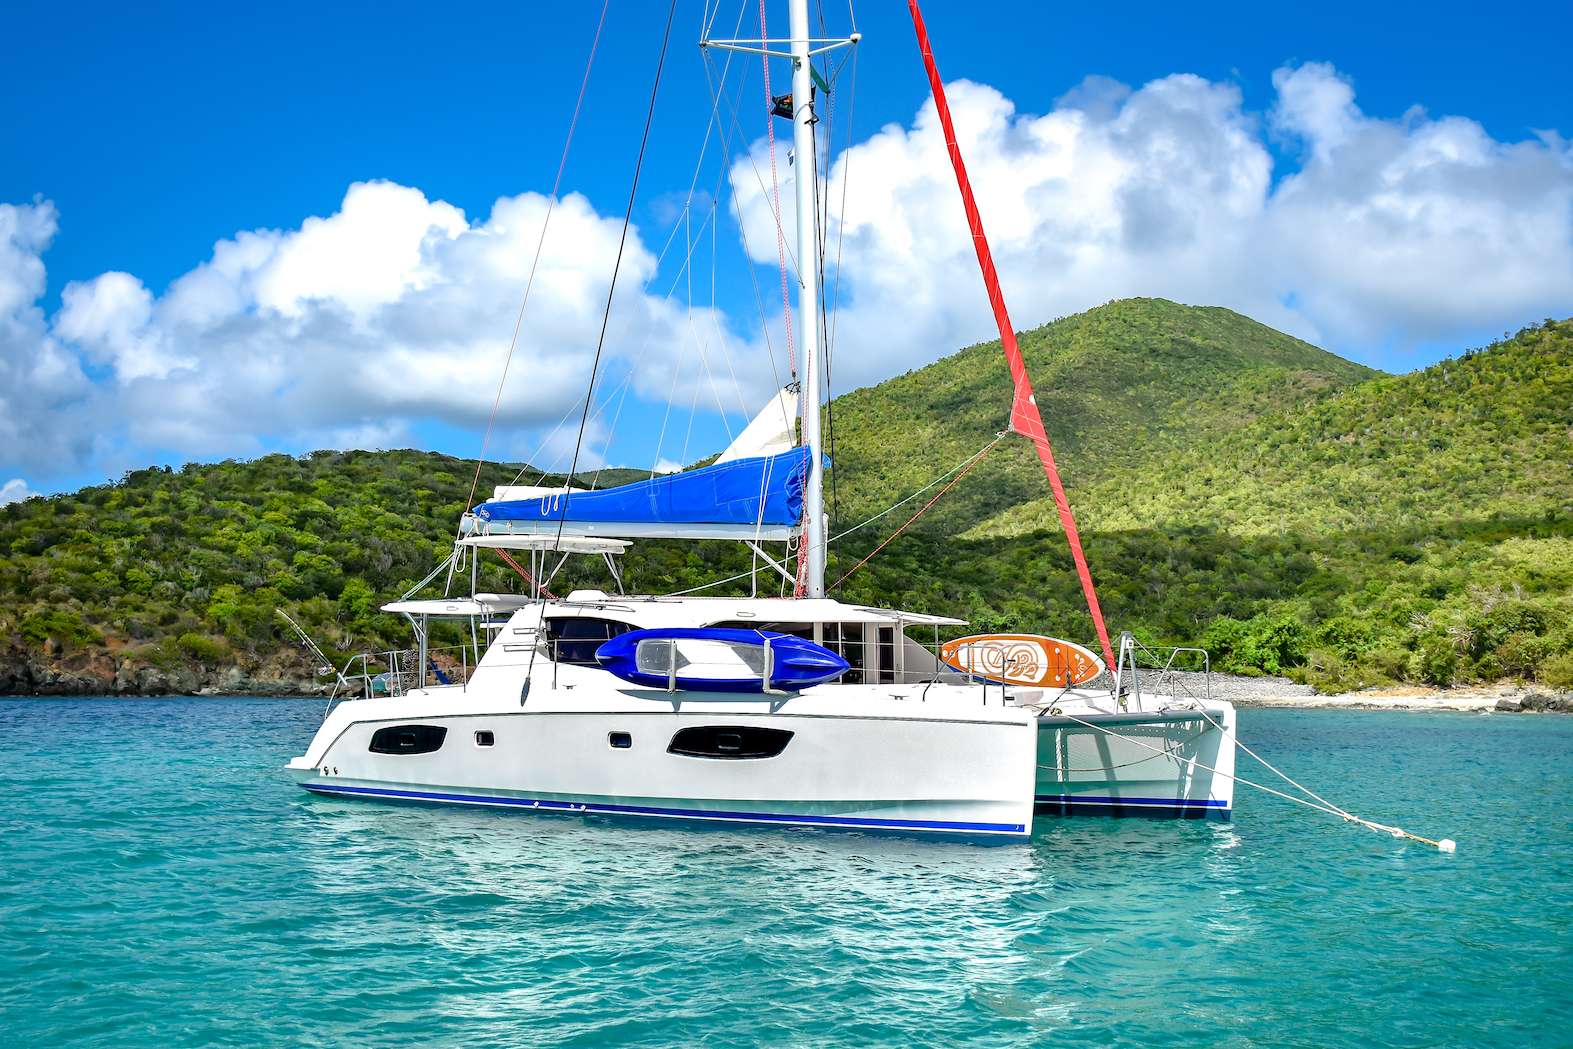 This lovely 2015 44' Leopard Catamaran is built with 3 queen cabins each with private ensuite baths including electric heads, vanity and separate showers. She boasts multiple areas to sit and relax or sip a cocktail and enjoy the cool island breeze of the beautiful Caribbean, especially in its unique forward cockpit lounge that gains access to the trampolines. You can even explore the beneath the surface while staying dry with its onboard clear-bottom kayak! The salon will seat up to 6 guests in comfort for lounging or dining. The exterior aft offers alfresco dining for up to 6 guests and a hammock! Your guests will never forget your experience on LPT!

TOYS: 2 Stand Up Paddle Boards, Snorkeling Gear, Floats, 1 Clear Bottom 2-Person Kayak, 1 Knee Board, 1 Wake Board, 1 Subwing, 2 Fishing Rods &amp; Onshore Games.

DIVING: Offered via rendezvous only